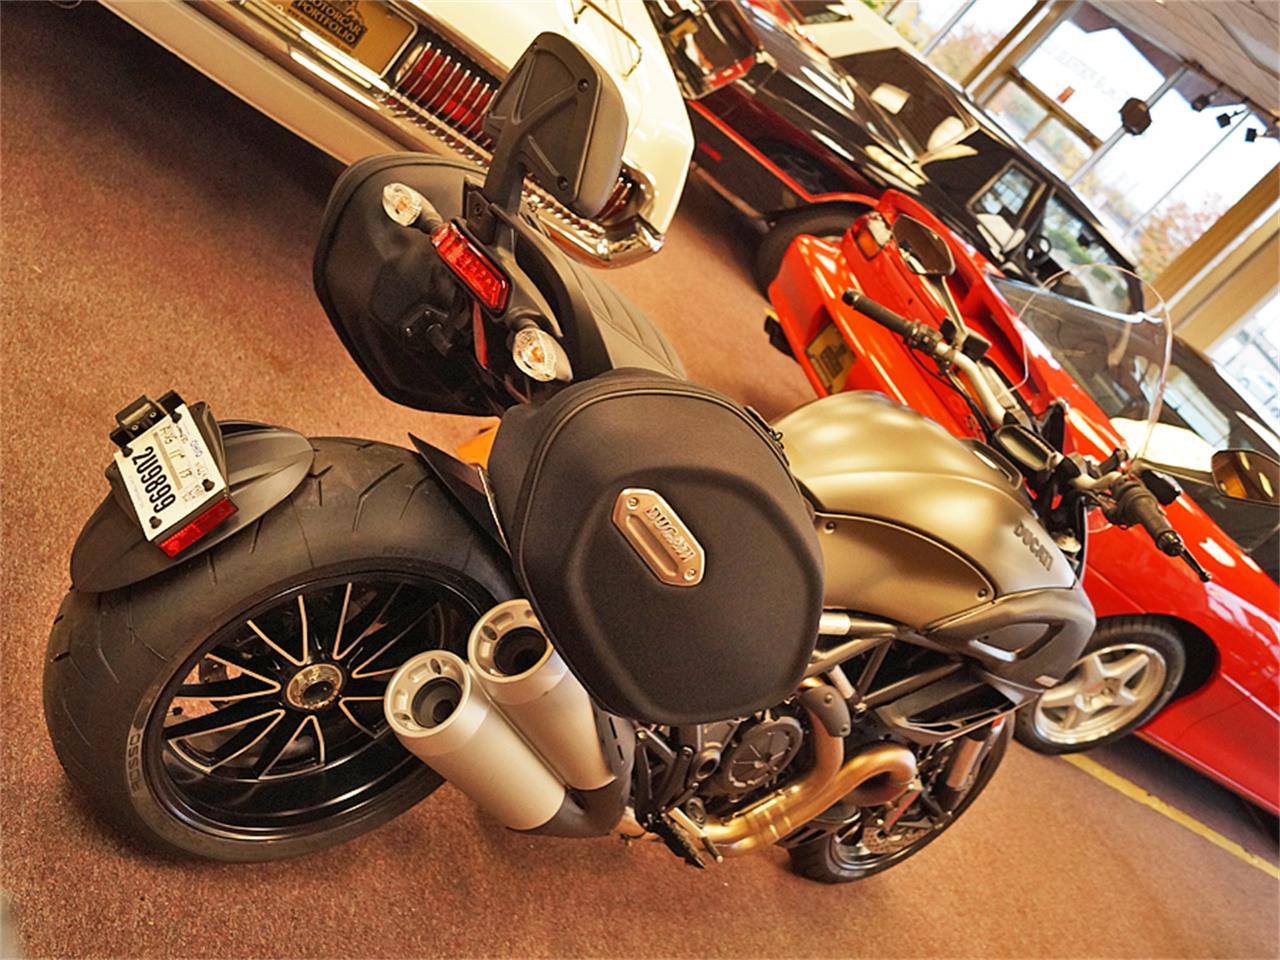 2014 Ducati Diavel for sale in Canton, OH – photo 3